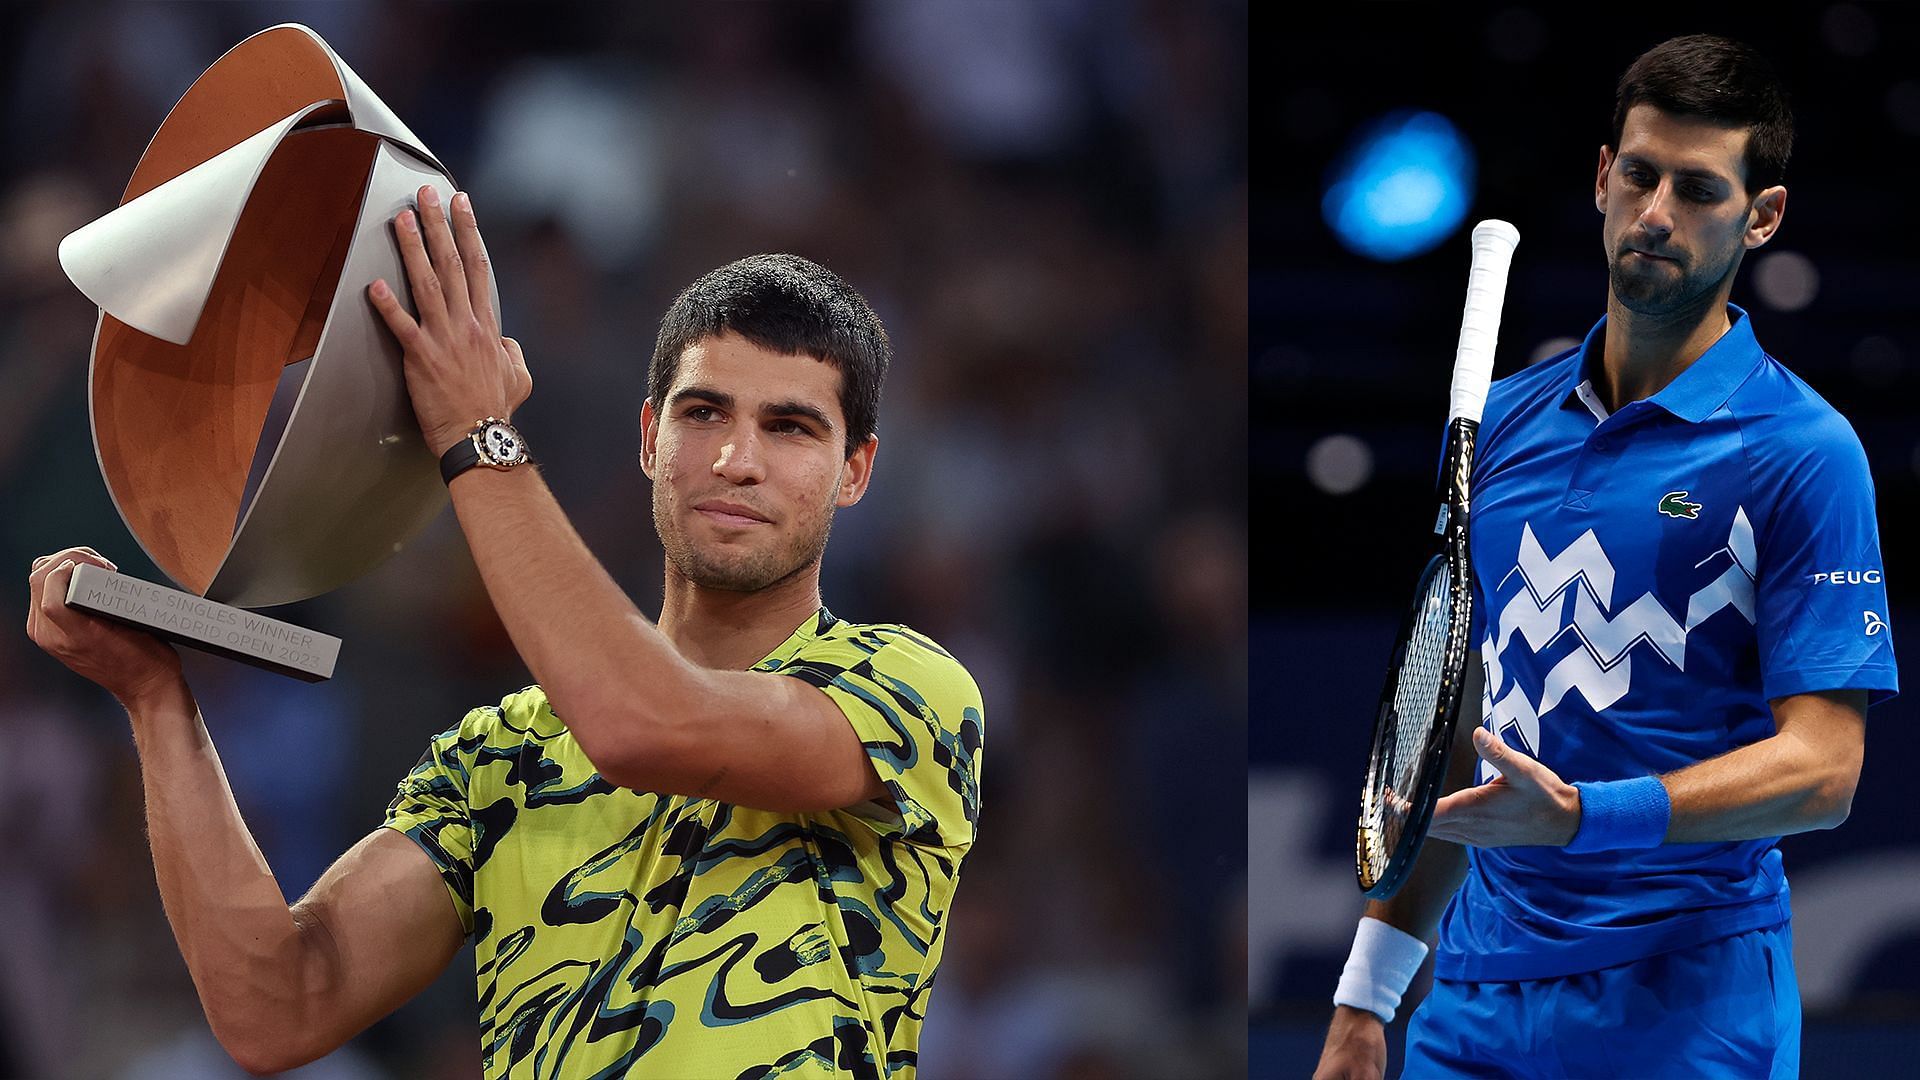 Djokovic and Alcaraz have faced each other only once